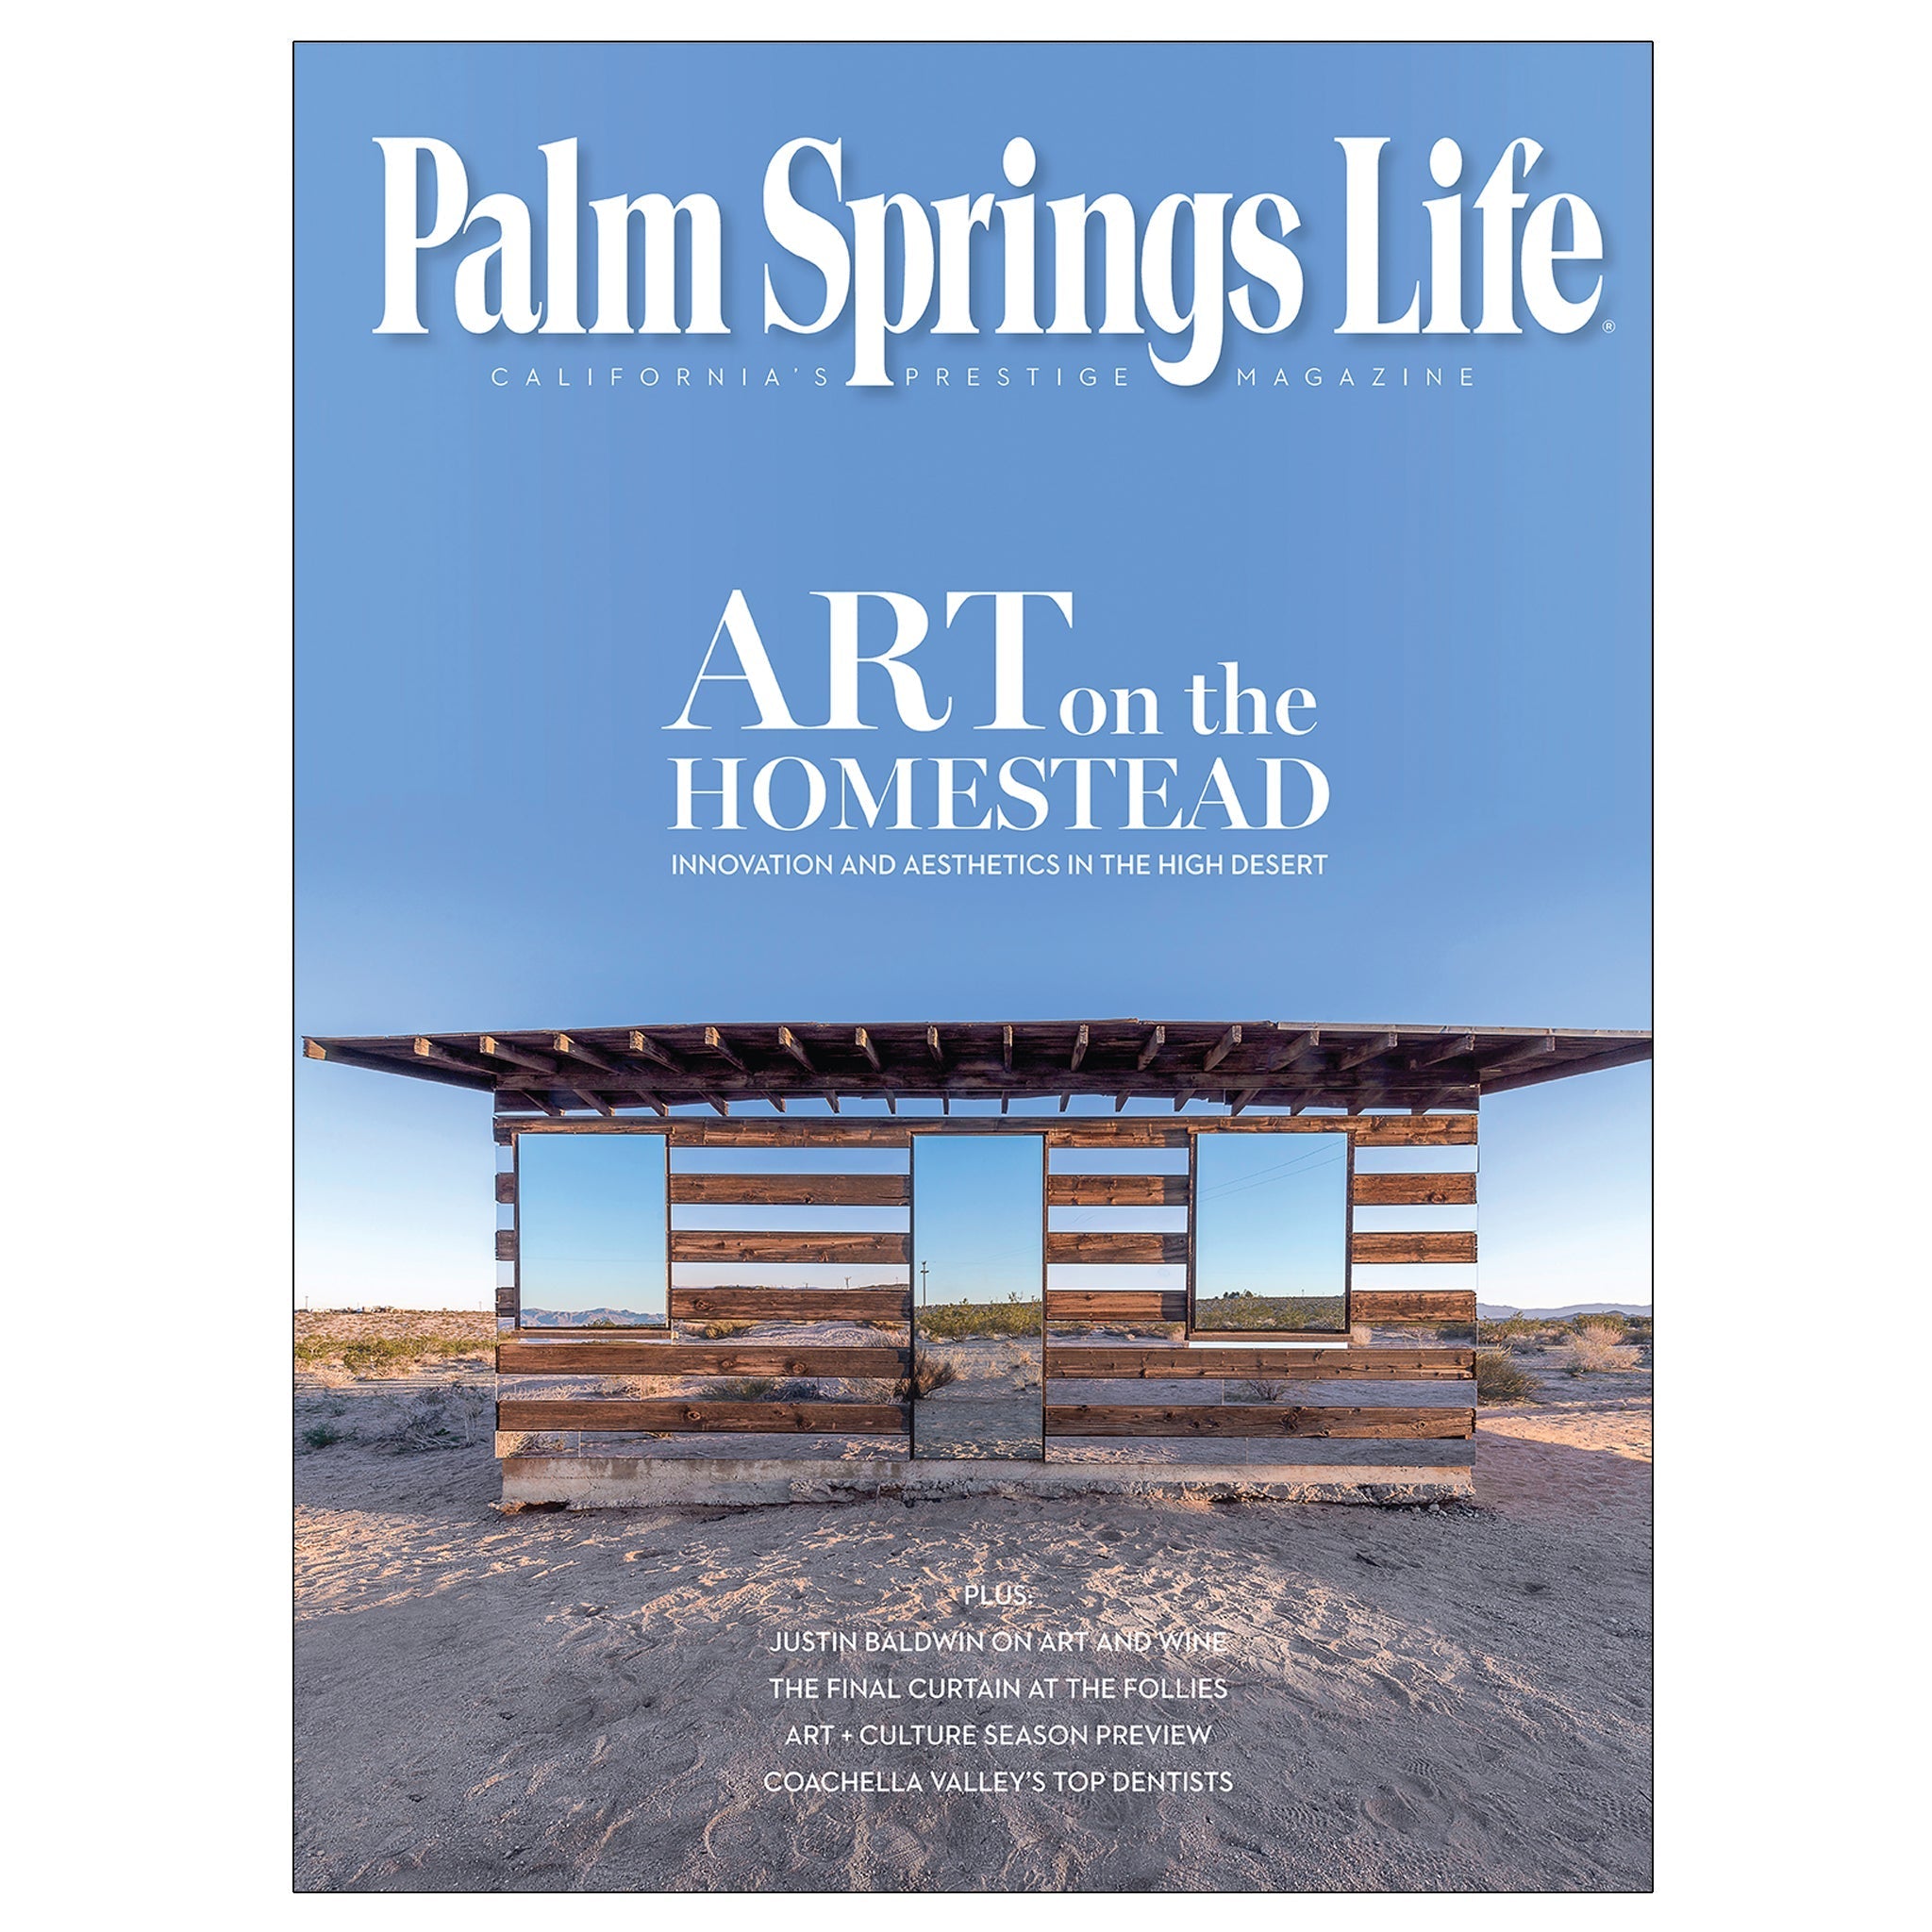 Palm Springs Life - December 2013 - Cover Poster